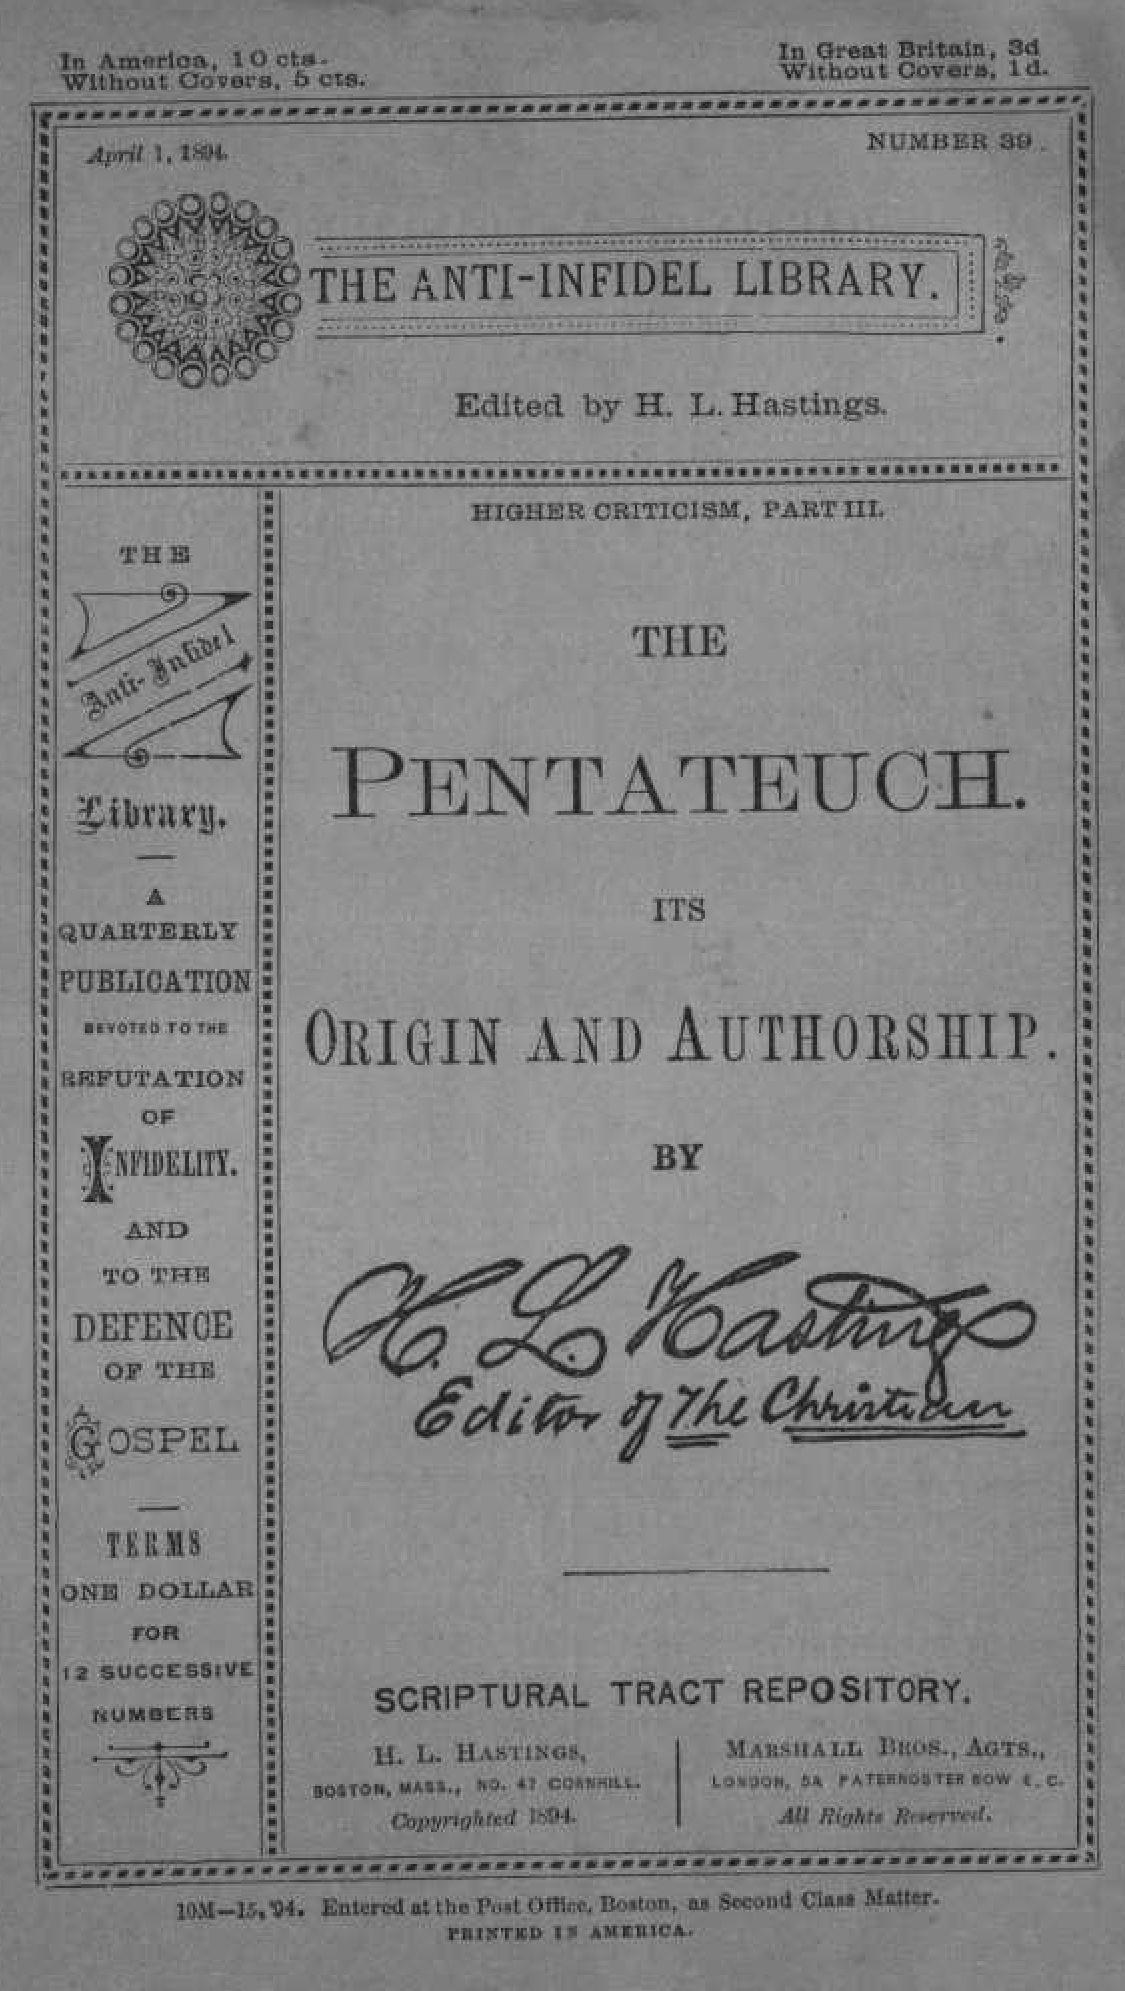 The Pentateuch: Its Origin and Authorship